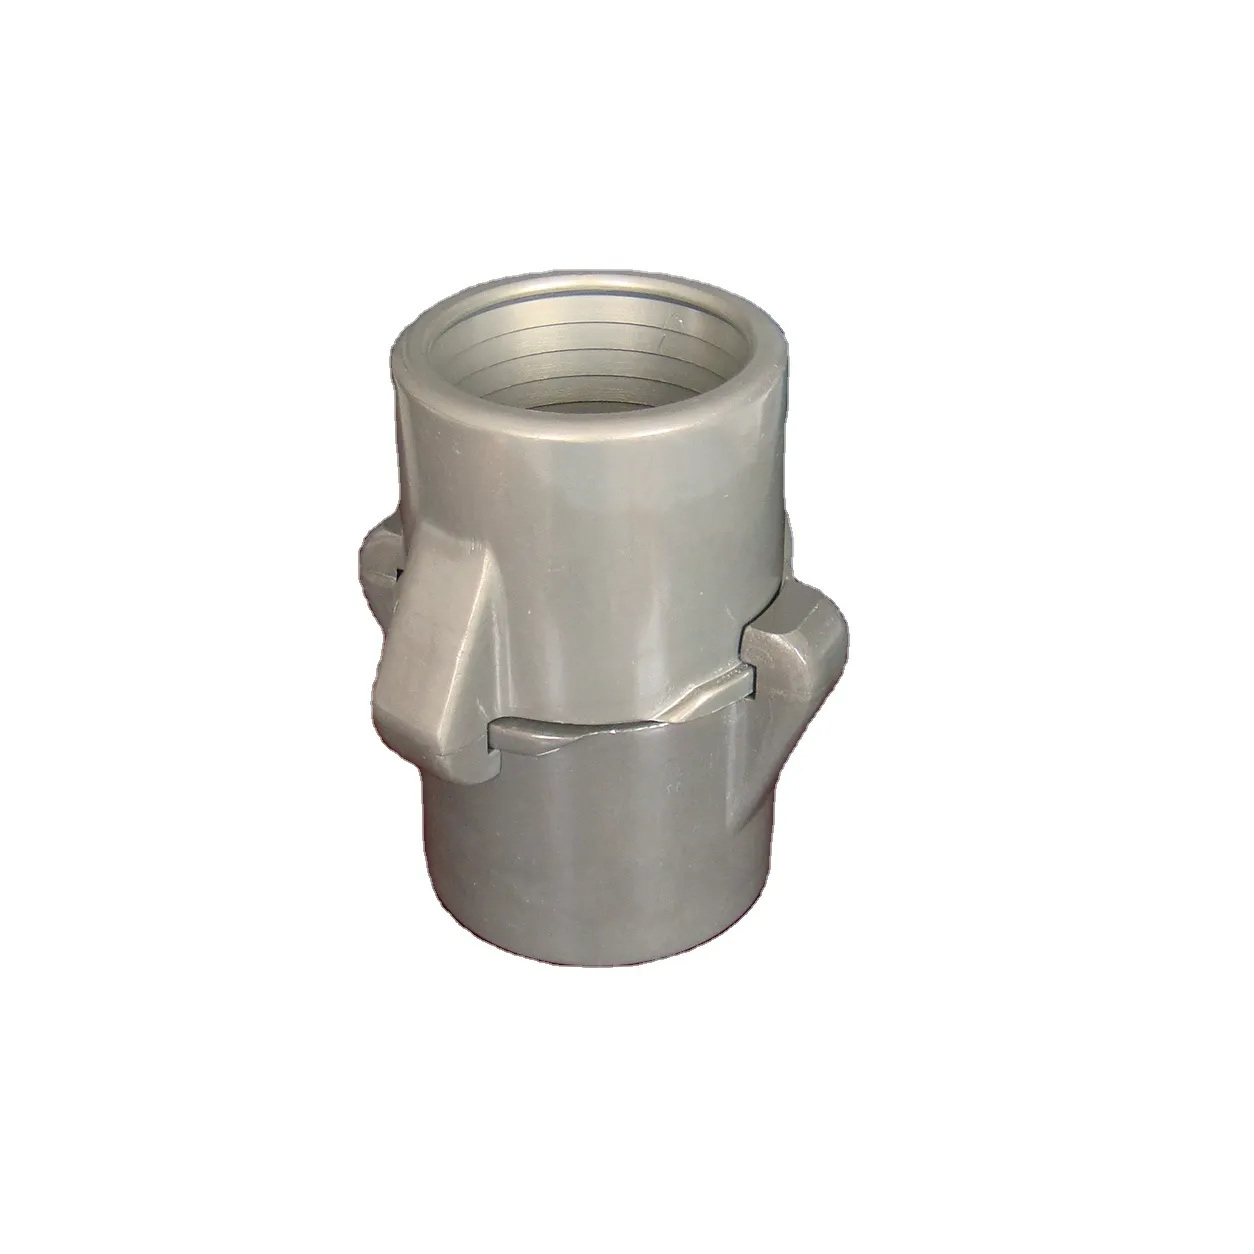 Aluminum Couplings for Forestry Fire Fighting Hose External Lug Forestry Expansion Ring Coupling